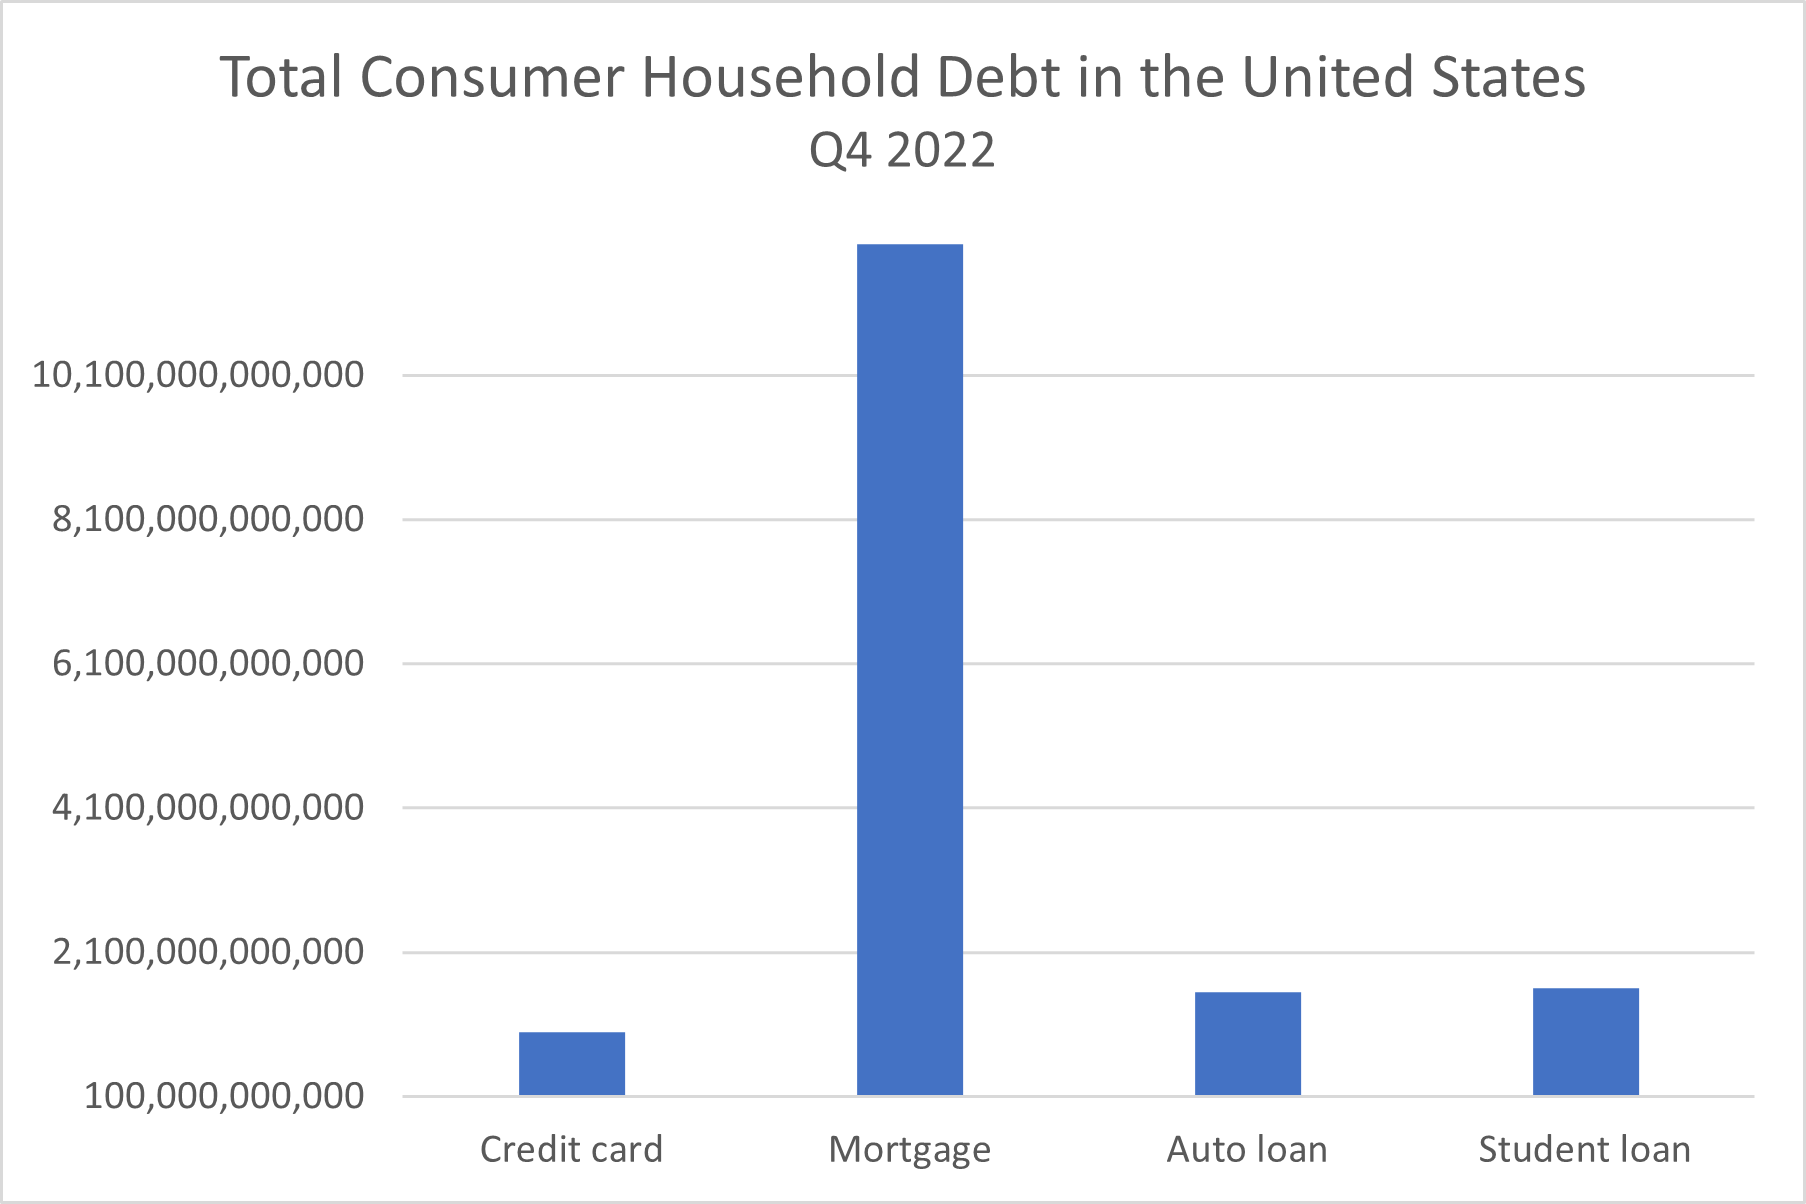 Total consumer household debt in the United States, Q4 2022